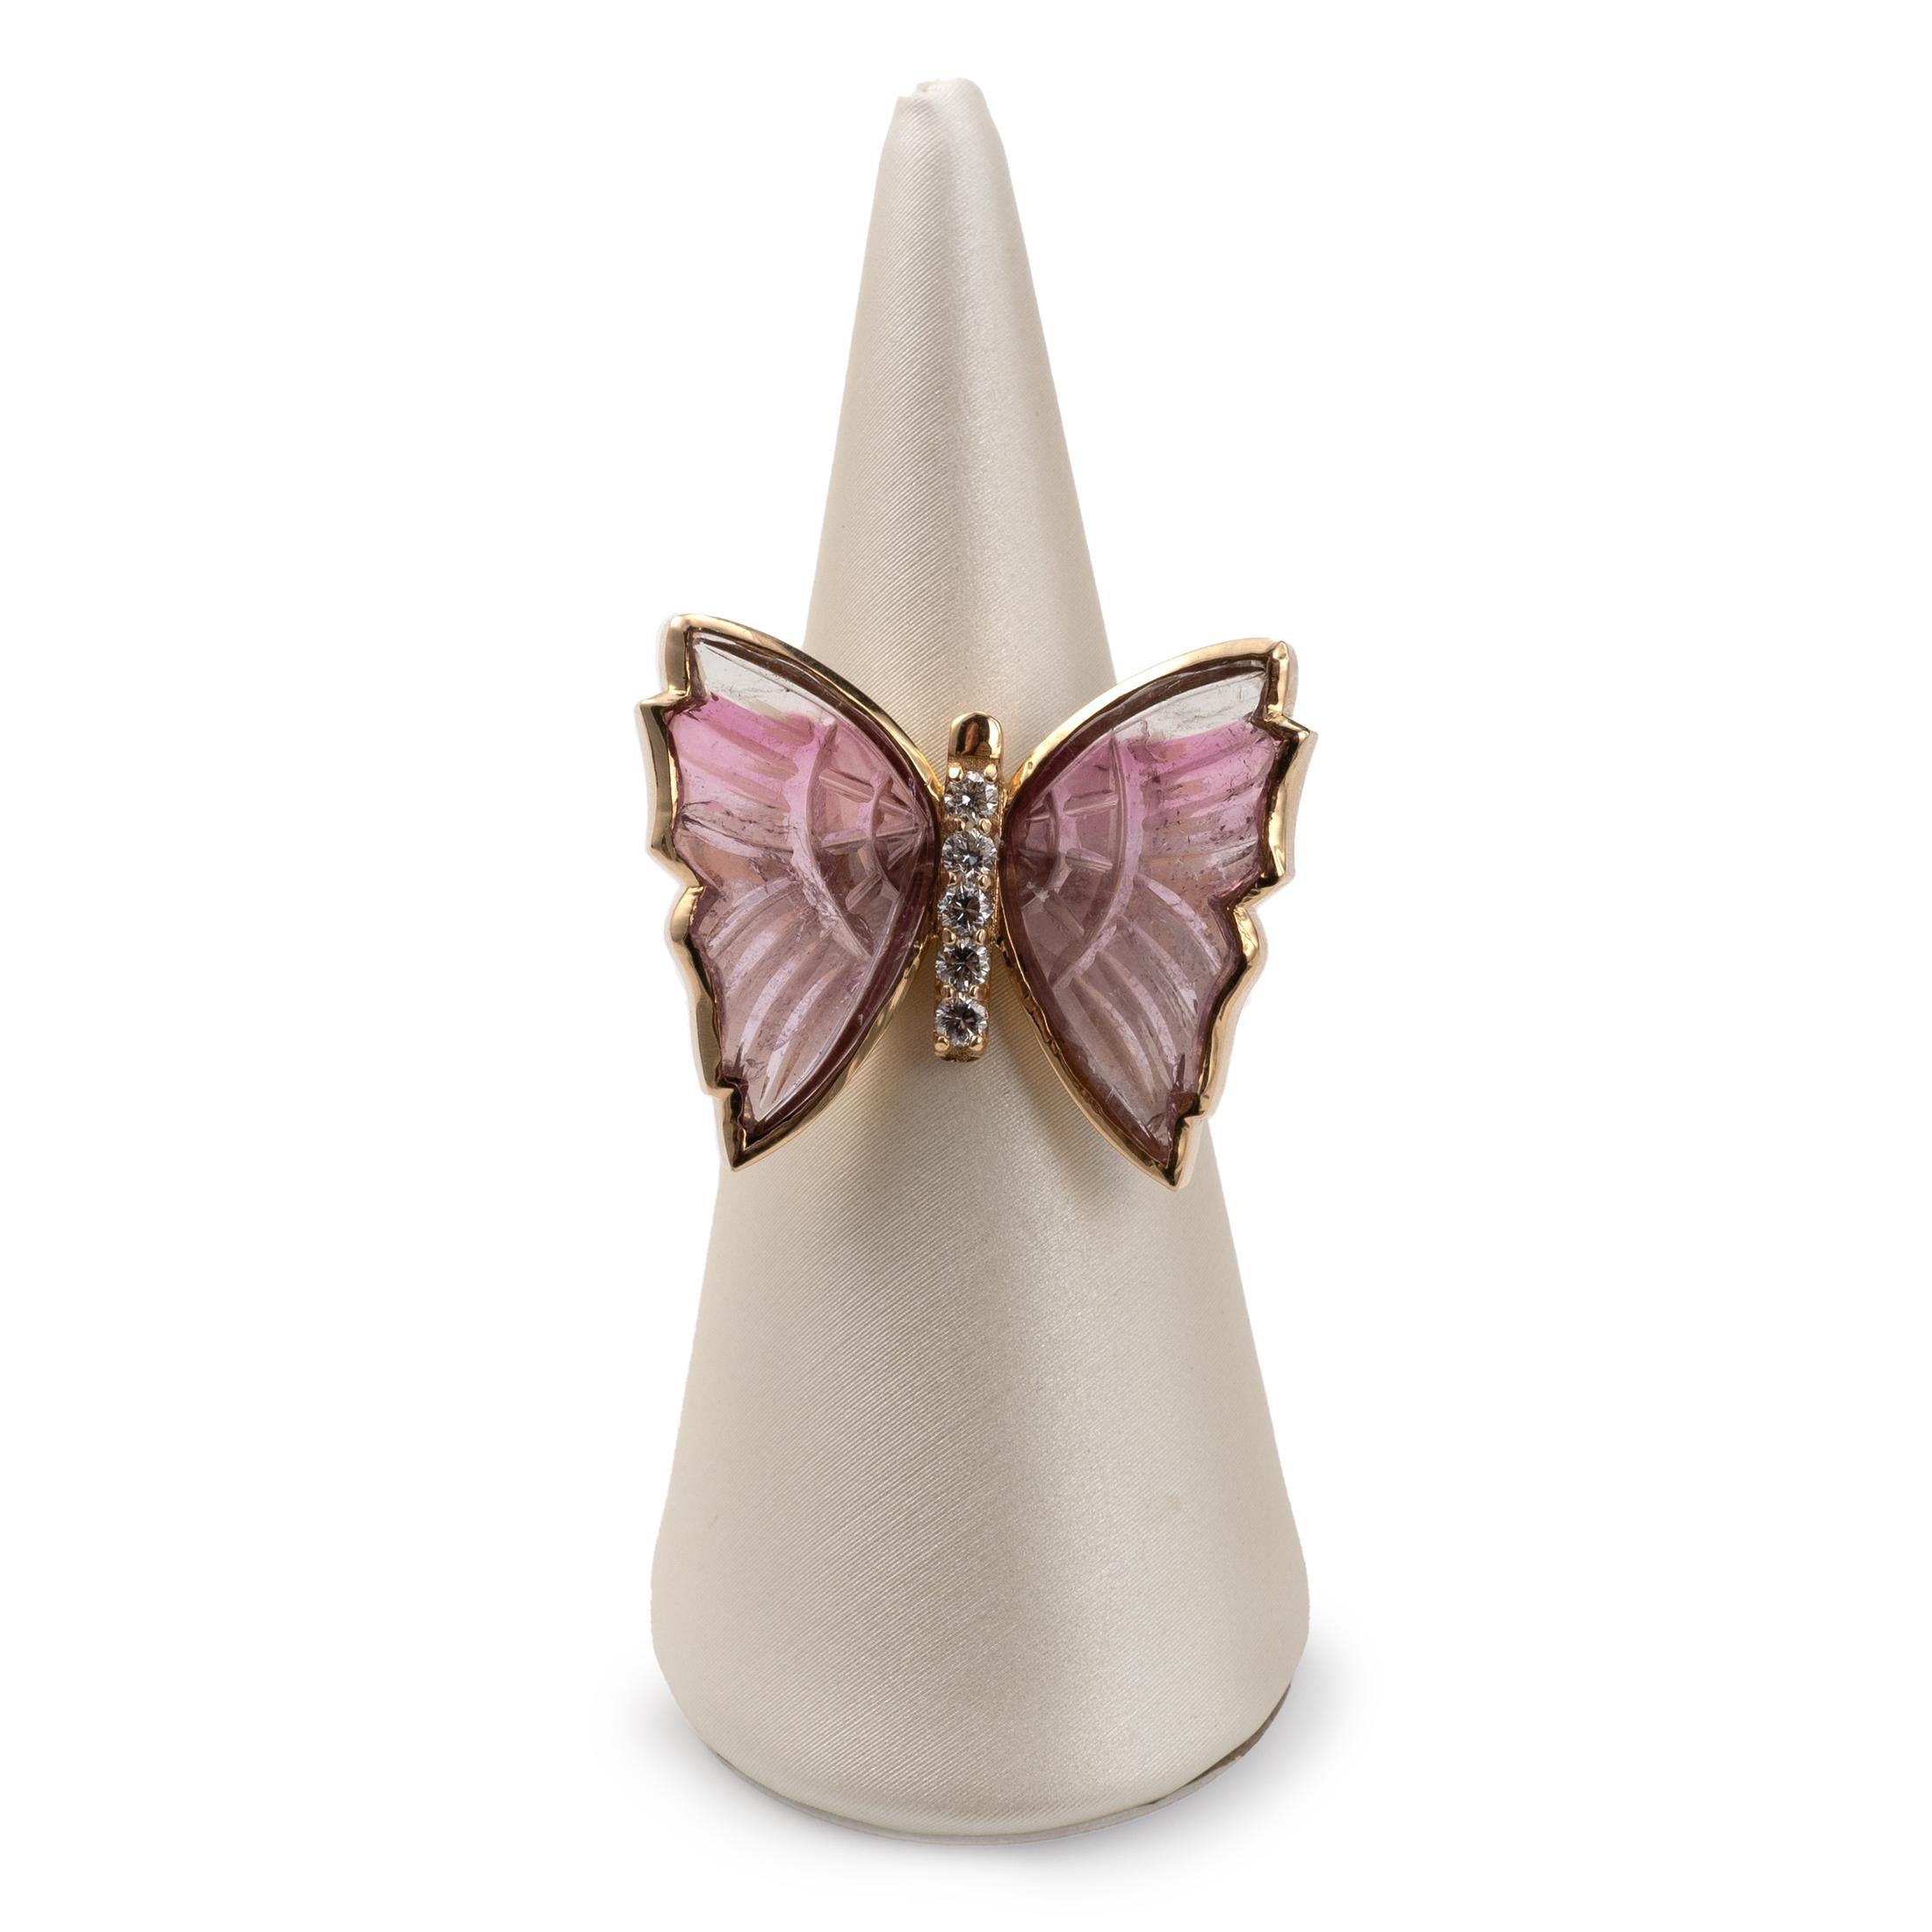 A fantastic statement ring in the form of a Butterfly!

The beautiful butterfly setting is embellished with 5 diamonds set into the body. The wings, made from pink natural tourmaline are carved with some detailing and fit neatly into the gold